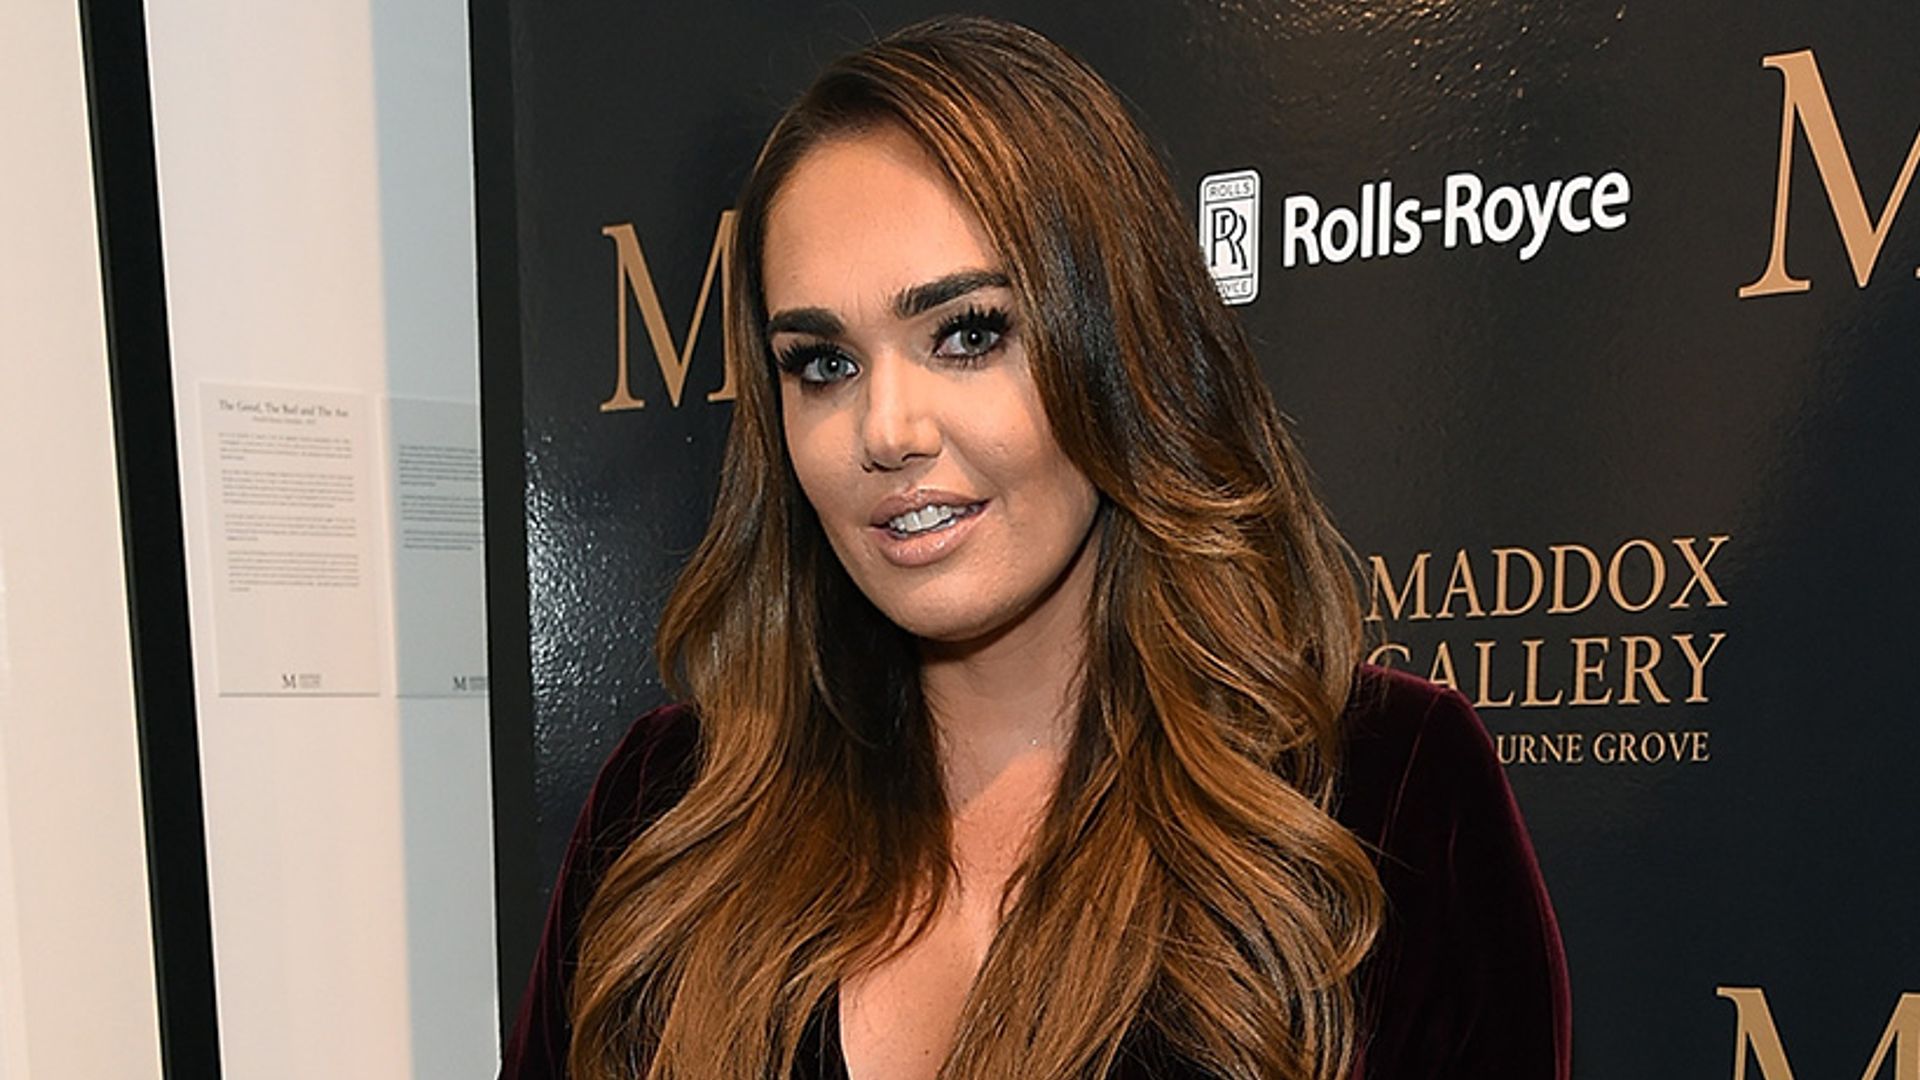 Tamara Ecclestone hits out at James Stunt following controversial interview